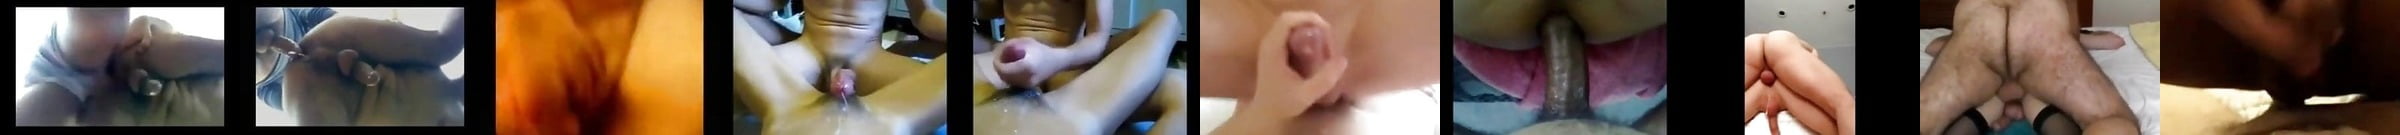 Anal Orgasm No Hands Cum While Being Fucked Compilation Xhamster